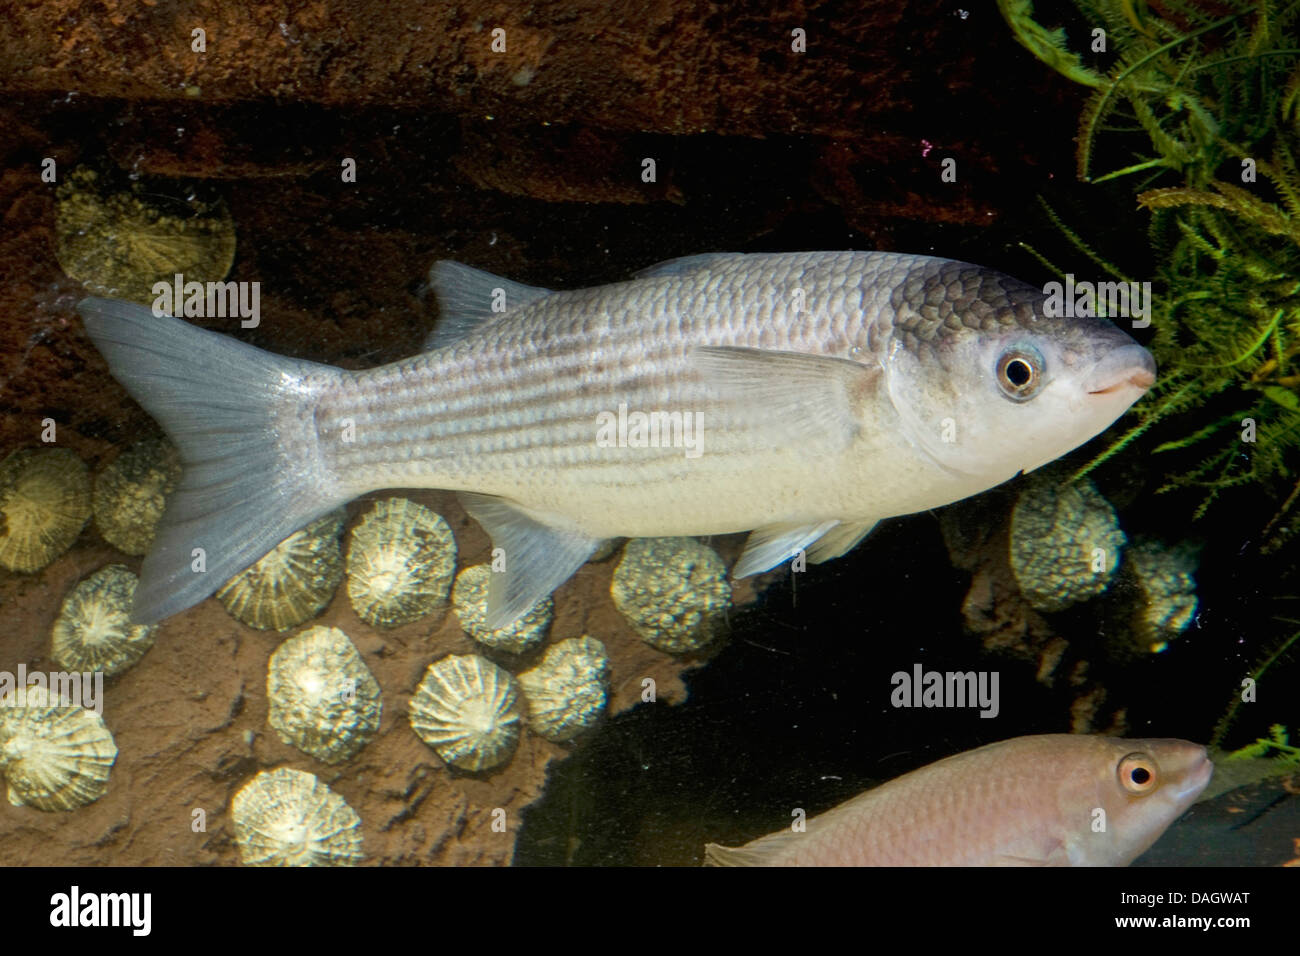 Thick-lipped grey mullet, Thick-lip grey mullet, Thicklip grey mullet (Chelon labrosus, Mugil chelo, Mugil provensalis), two mullets and some limpets Stock Photo